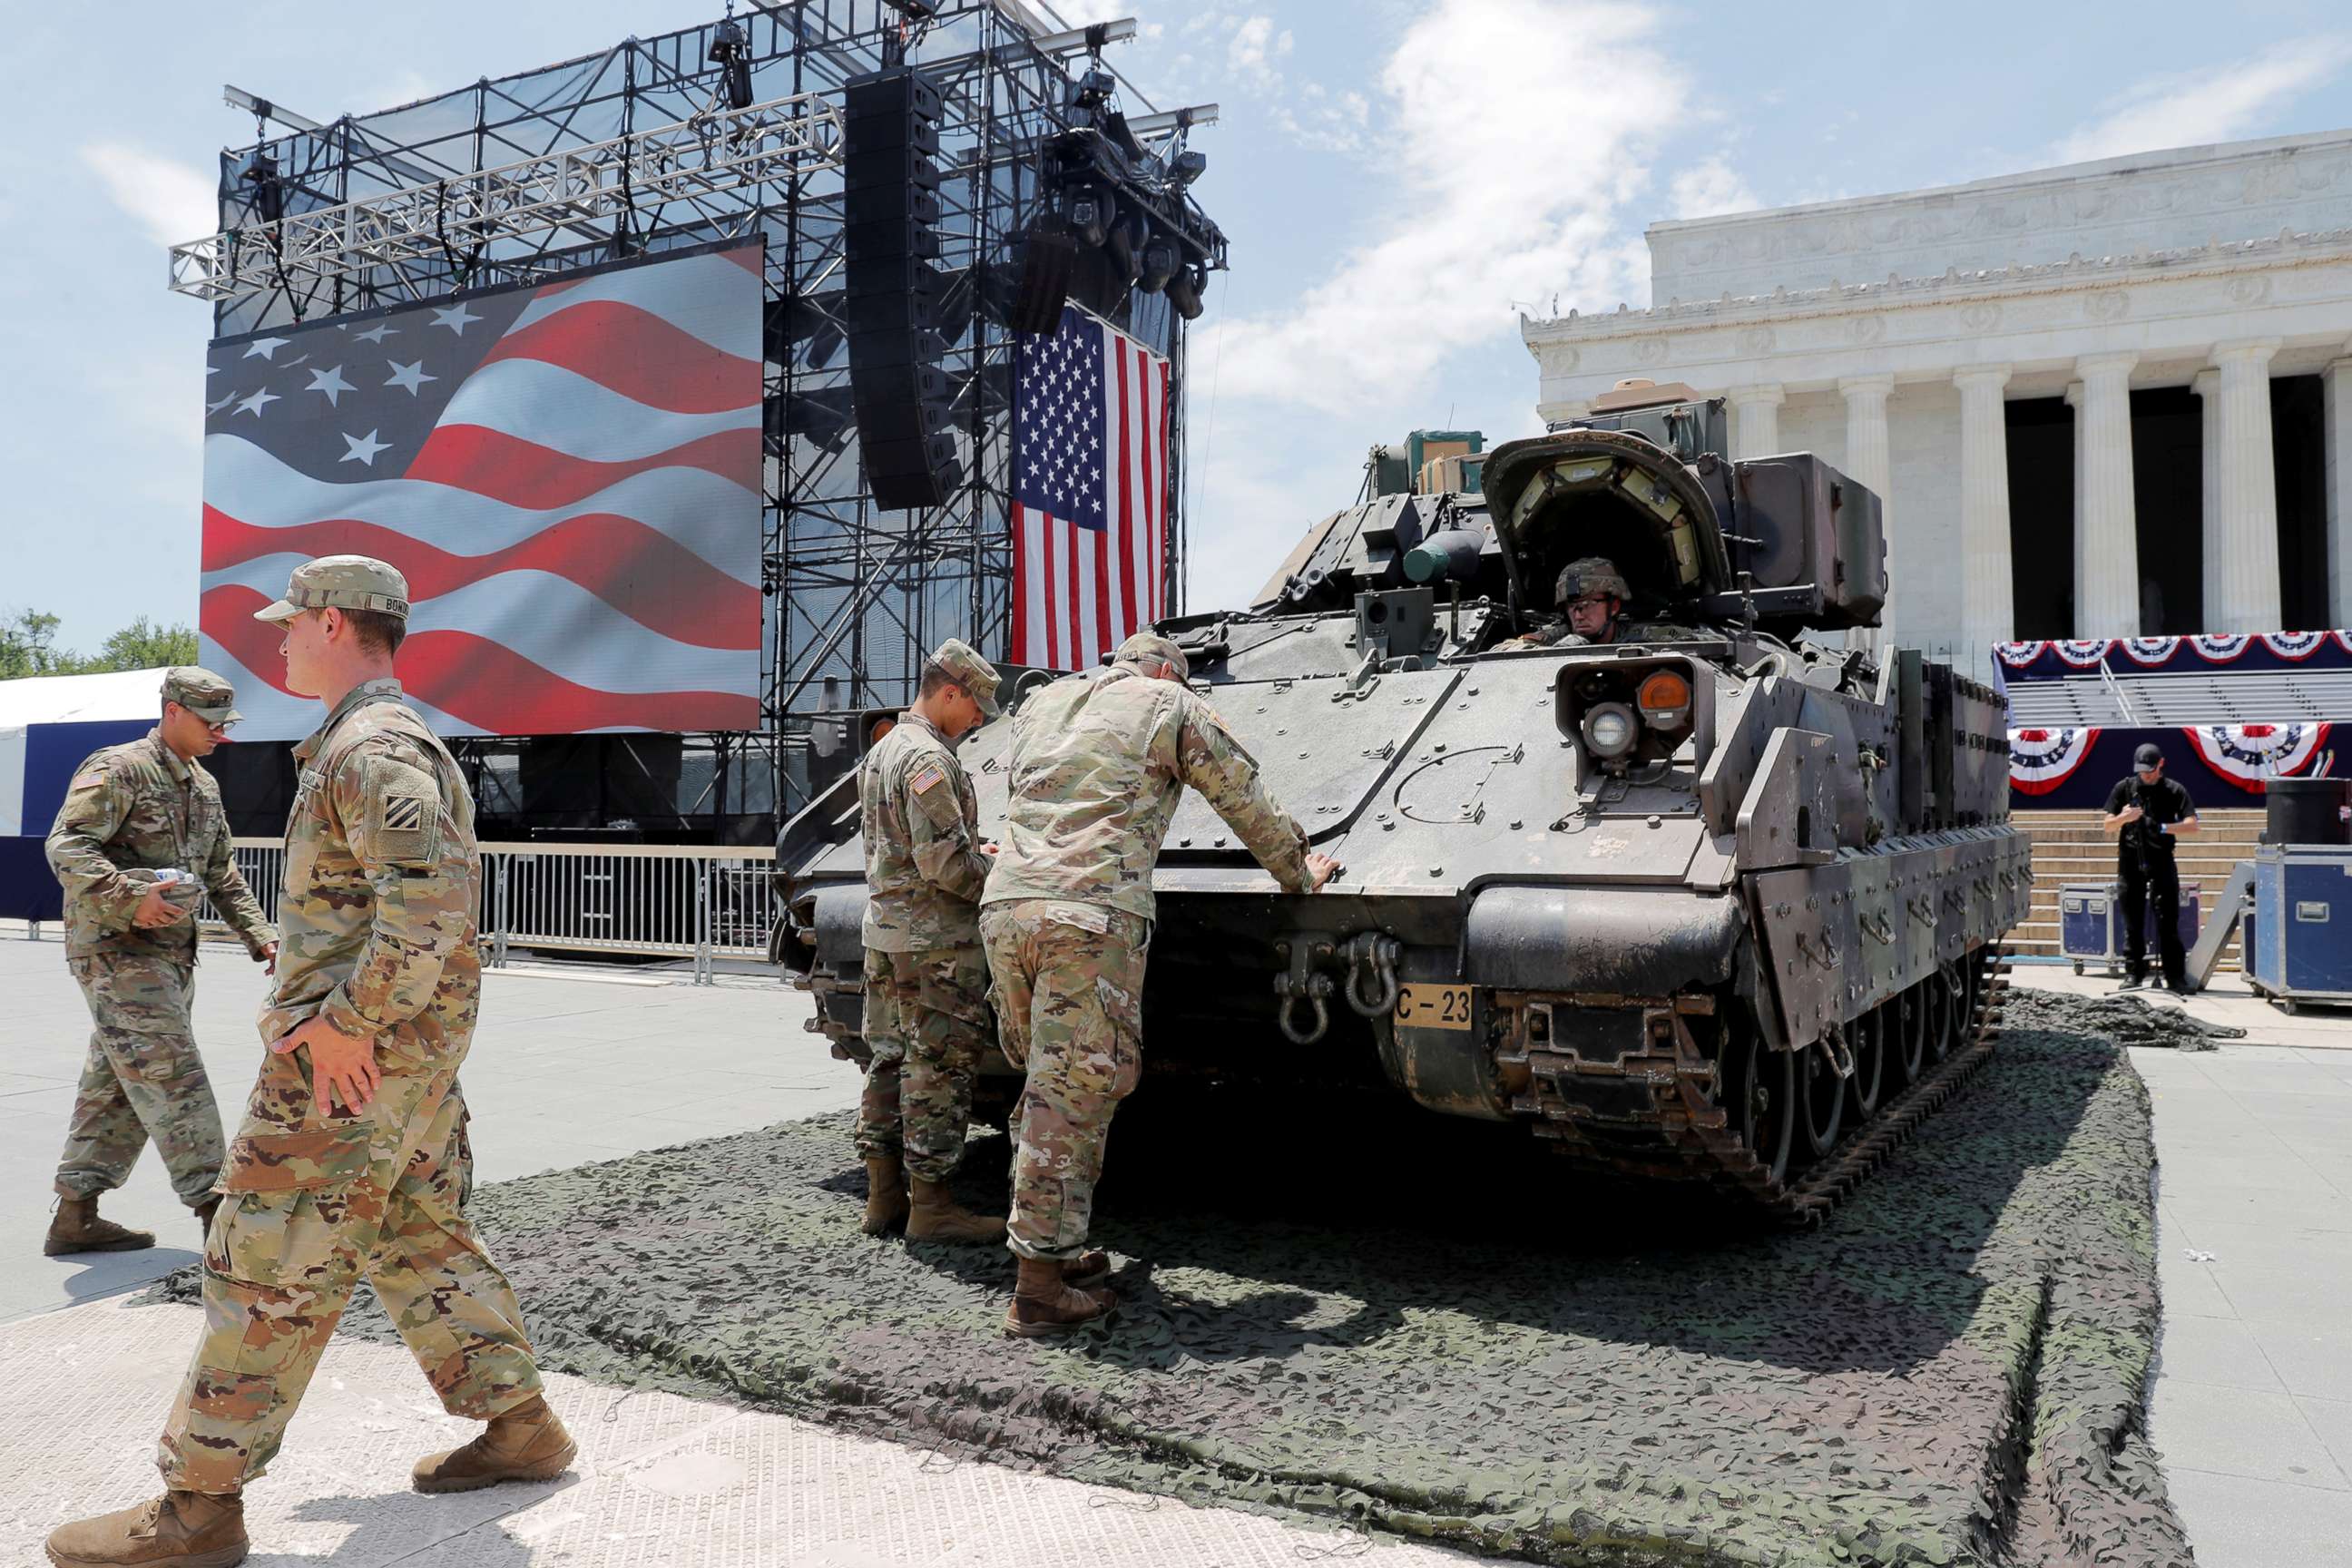 PHOTO: Members of the U.S. Army's 3rd Infantry Division, 1st Battalion, 64th Armored Regiment based at Fort Stewart, Ga., assist as a Bradley Fighting Vehicle is moved into place ahead of a July Fourth celebration in Washington, July 3, 2019.